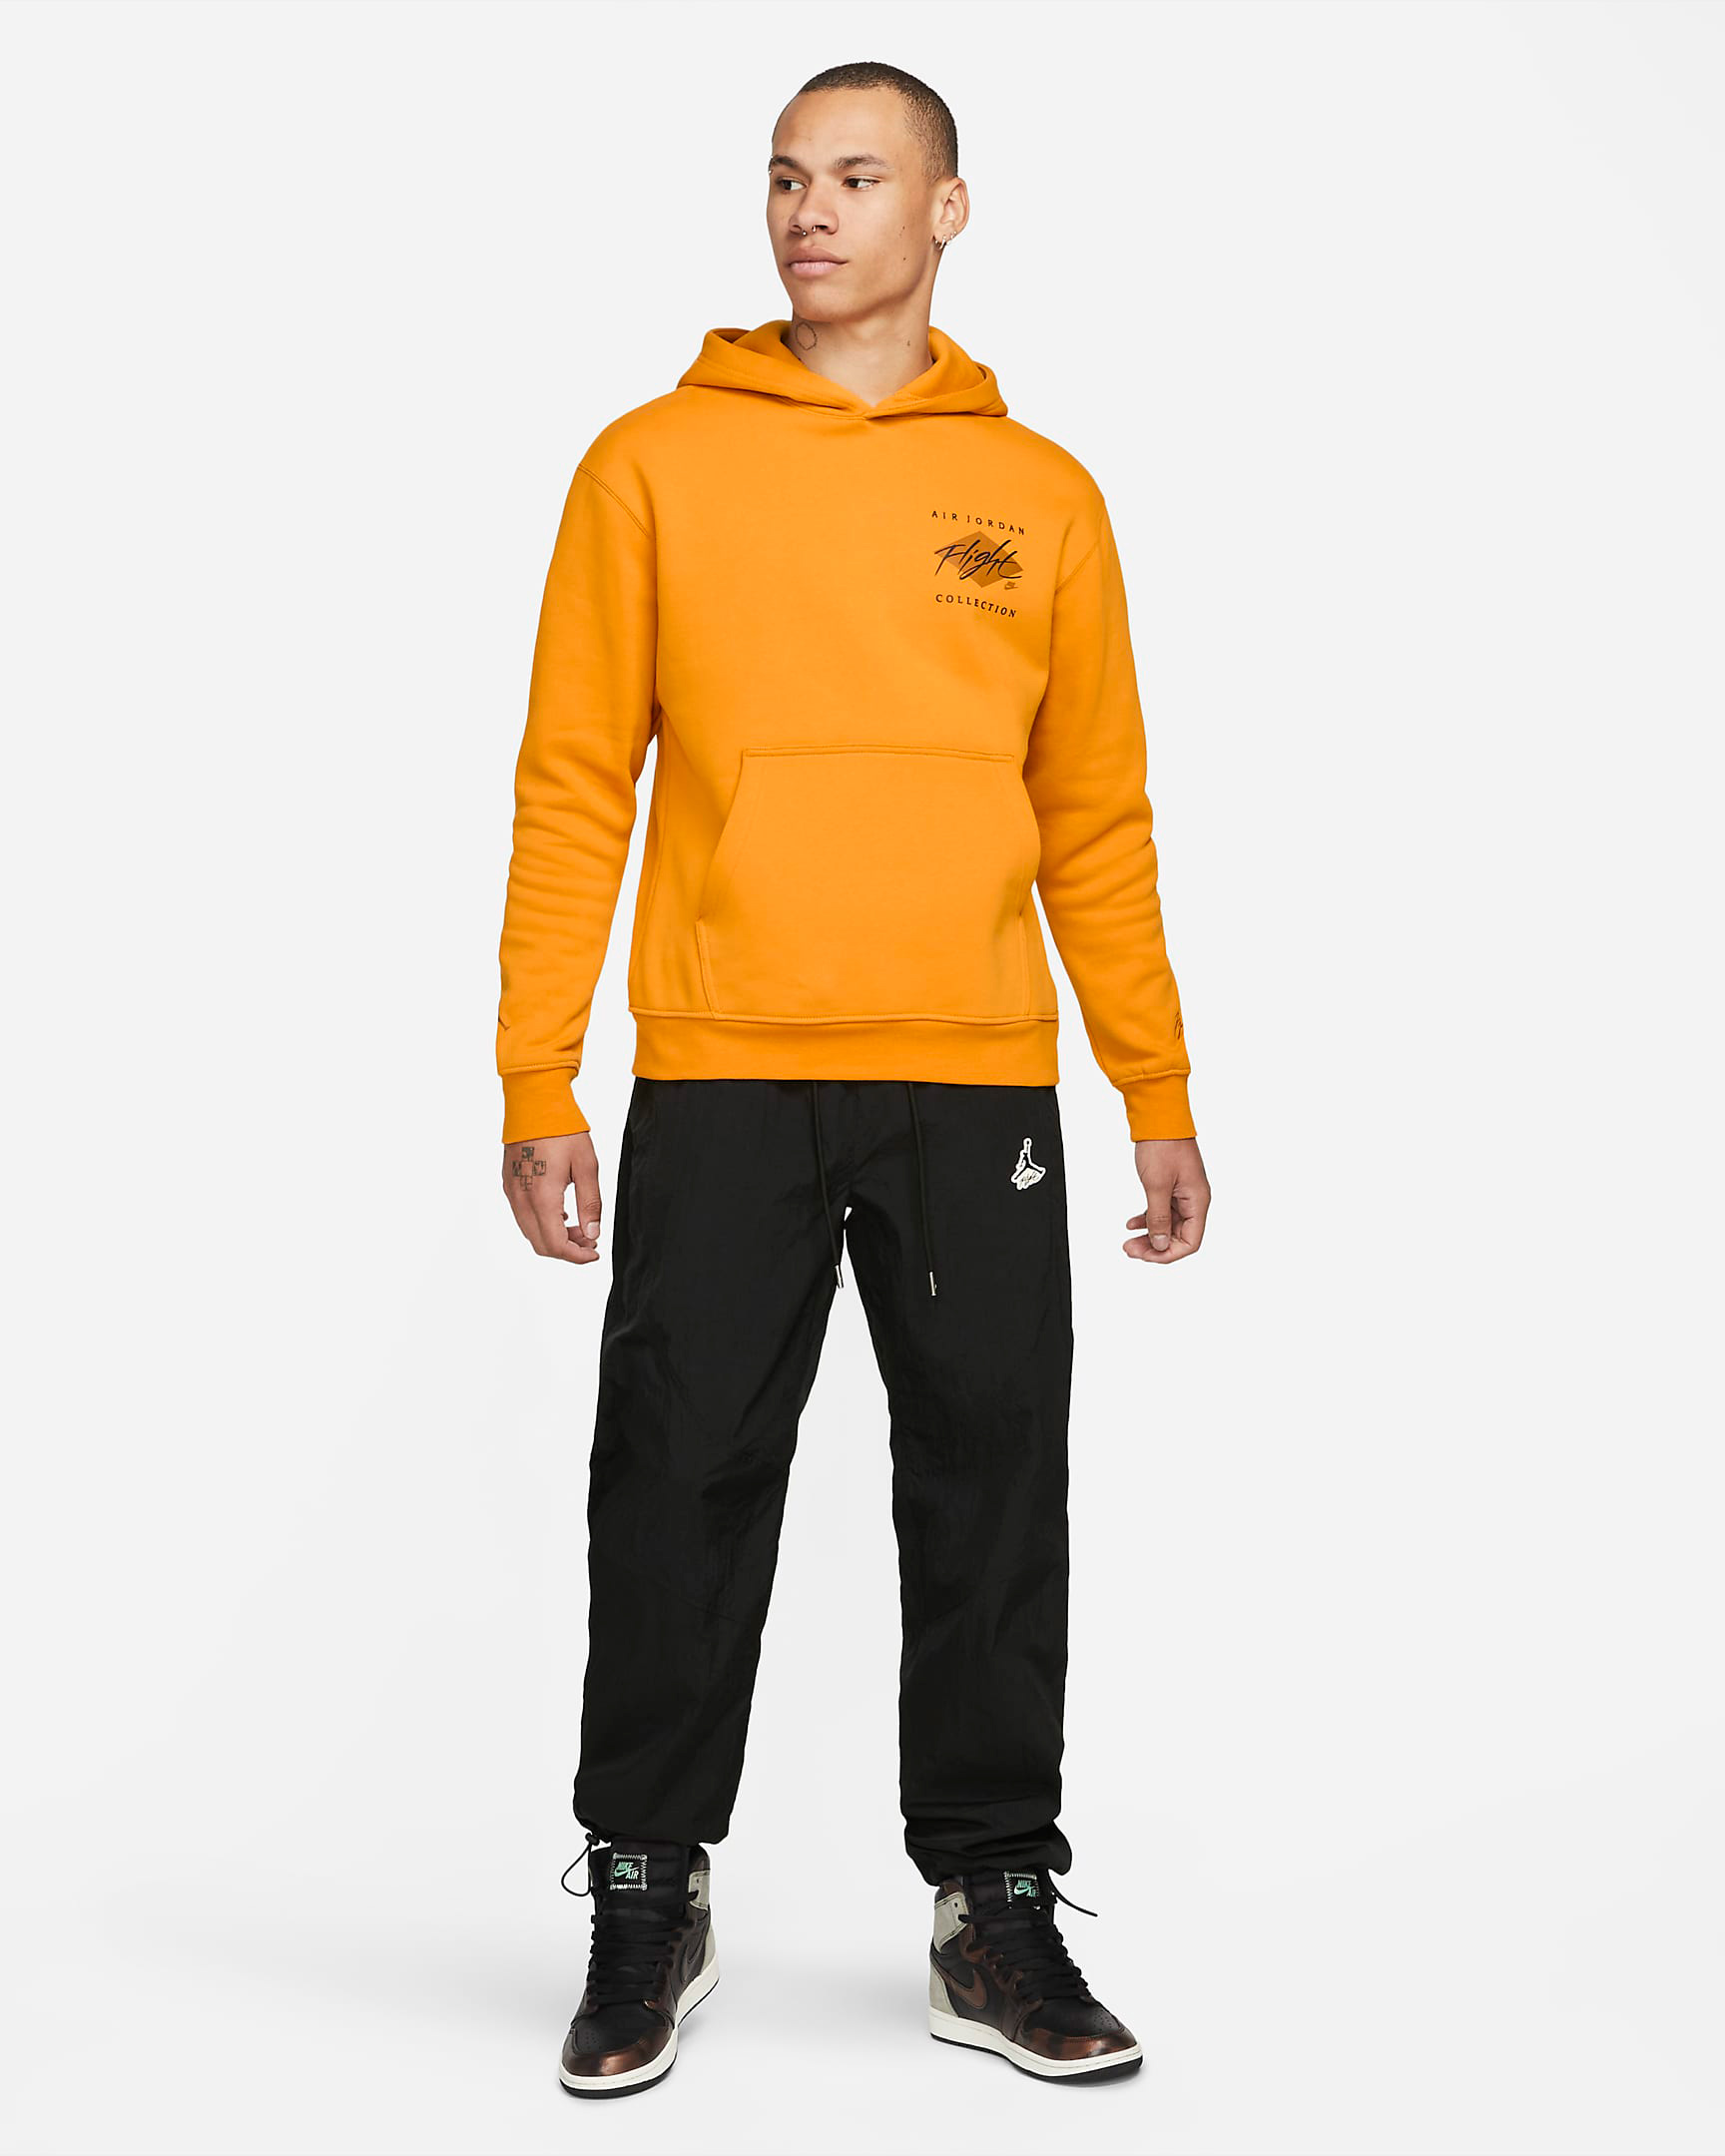 jordan-light-curry-sneaker-clothing-outfit-1